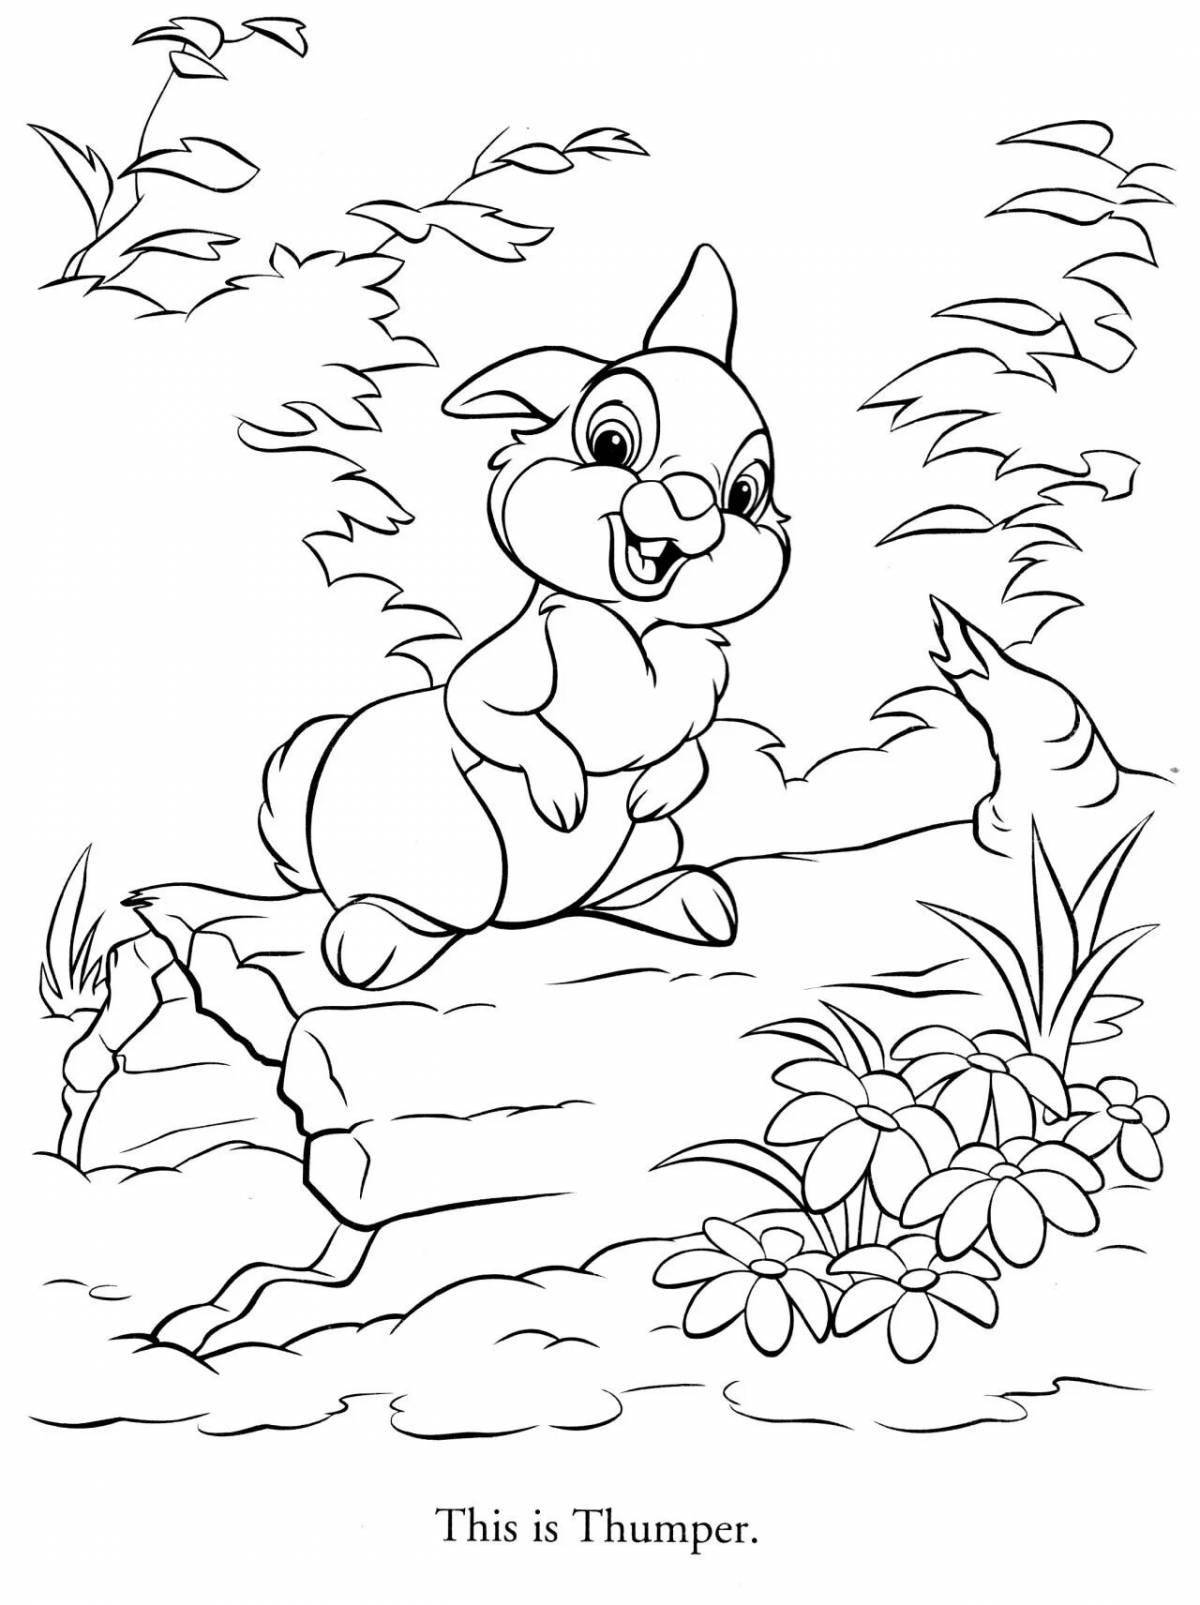 Violent coloring rabbit in the forest